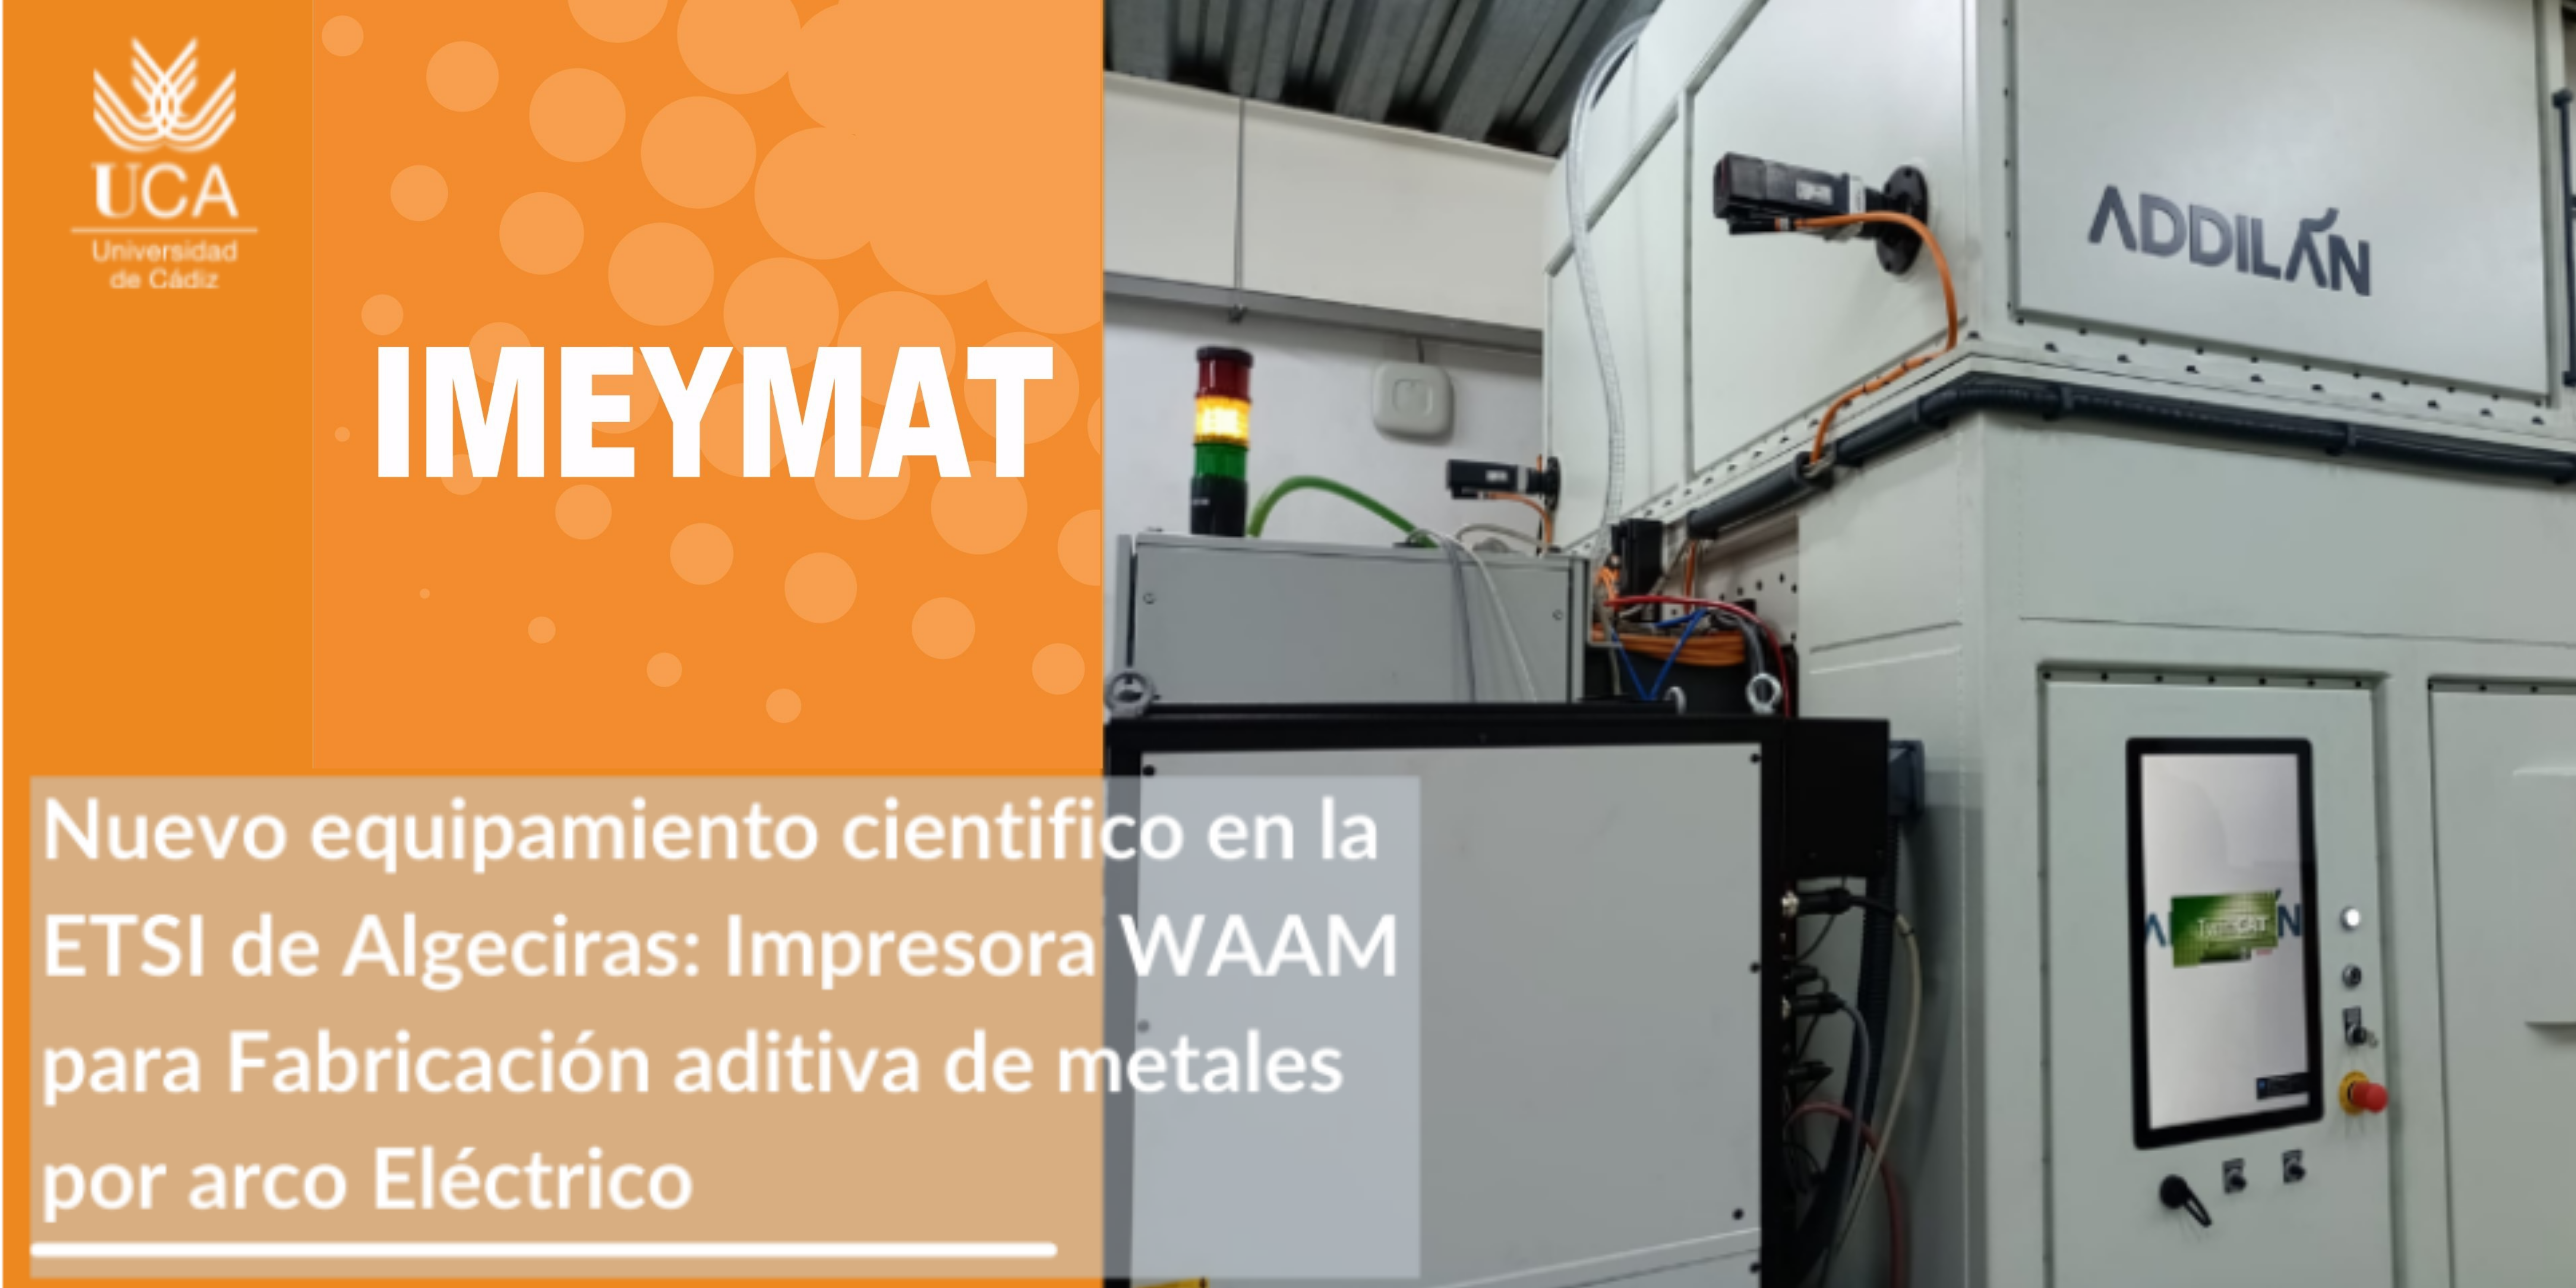 Colleagues from the IMEYMAT Institute lead the acquisition of WAAM additive manufacturing equipment to make large-format metal parts at ETSIA